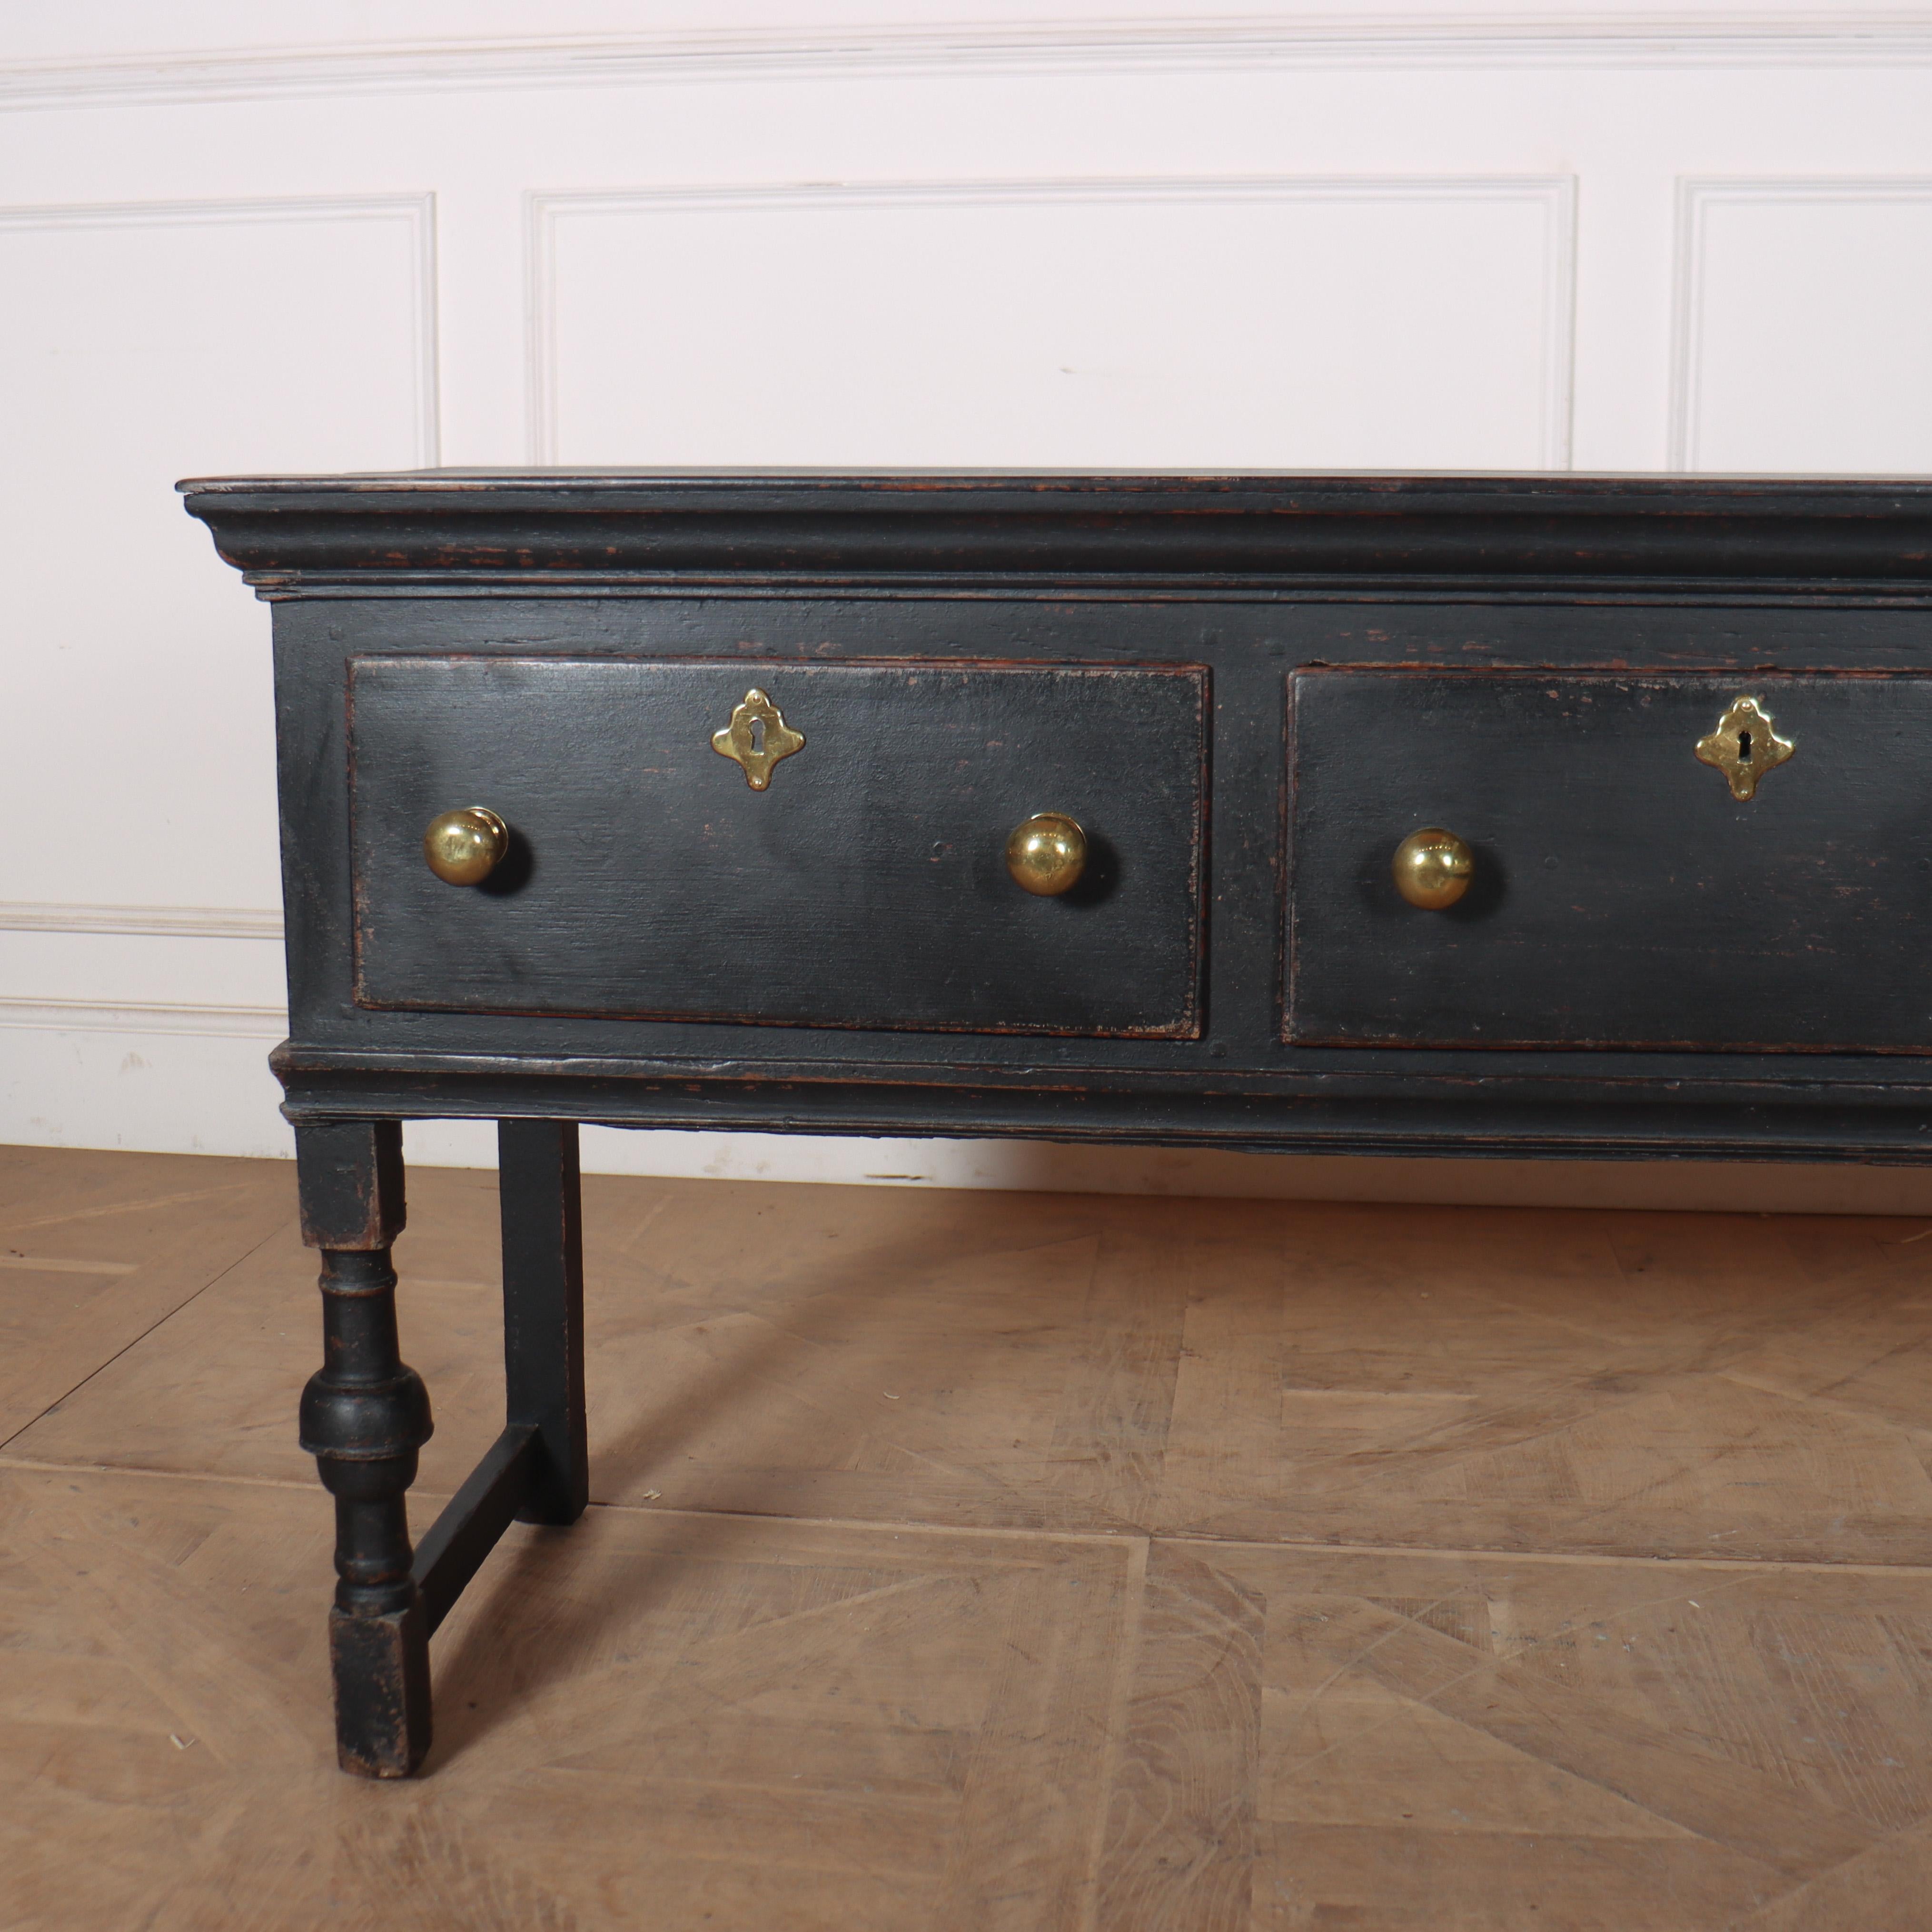 Good 18th C geometric English 3 drawer painted oak dresser base. 1760.

Reference: 8253

Dimensions
77 inches (196 cms) Wide
17.5 inches (44 cms) Deep
31 inches (79 cms) High